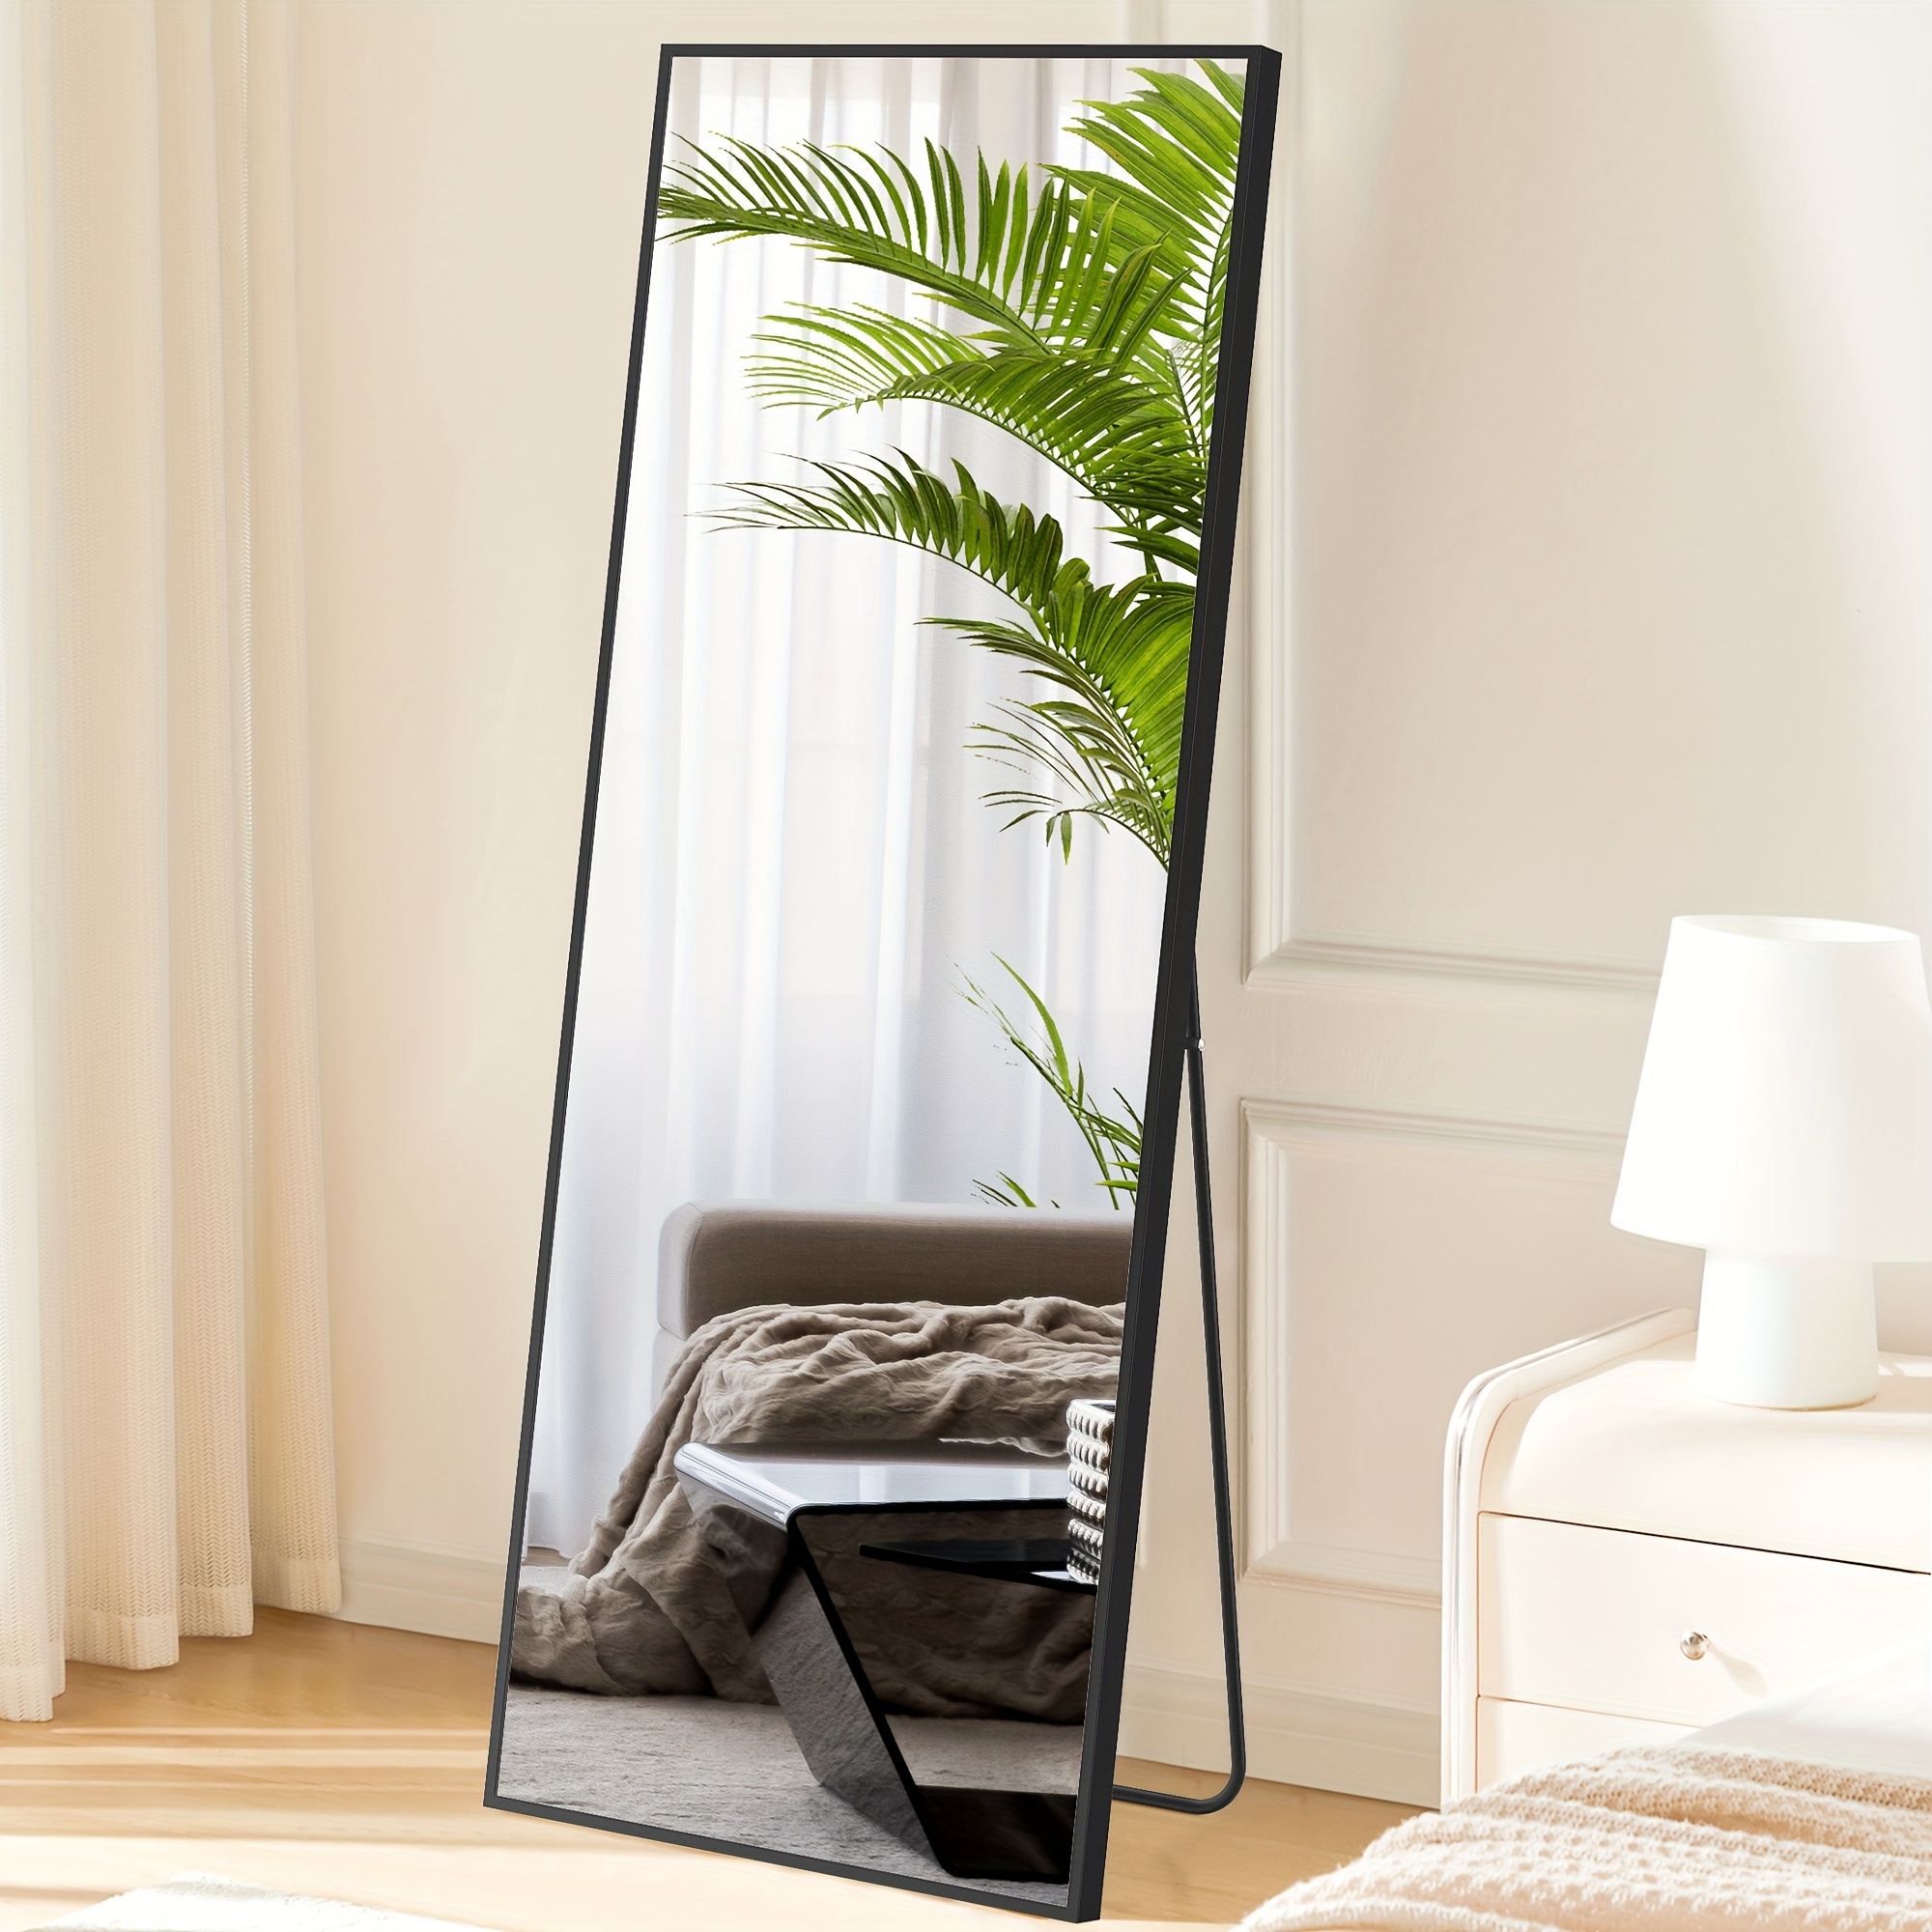 

Full Length Mirror With Stand, 64"x21" Floor Mirror With Aluminum Alloy Frame For Bedroom, Standing Full Body Mirror With Shatter-proof Nano Glass For Wall, Living Room, Cloakroom